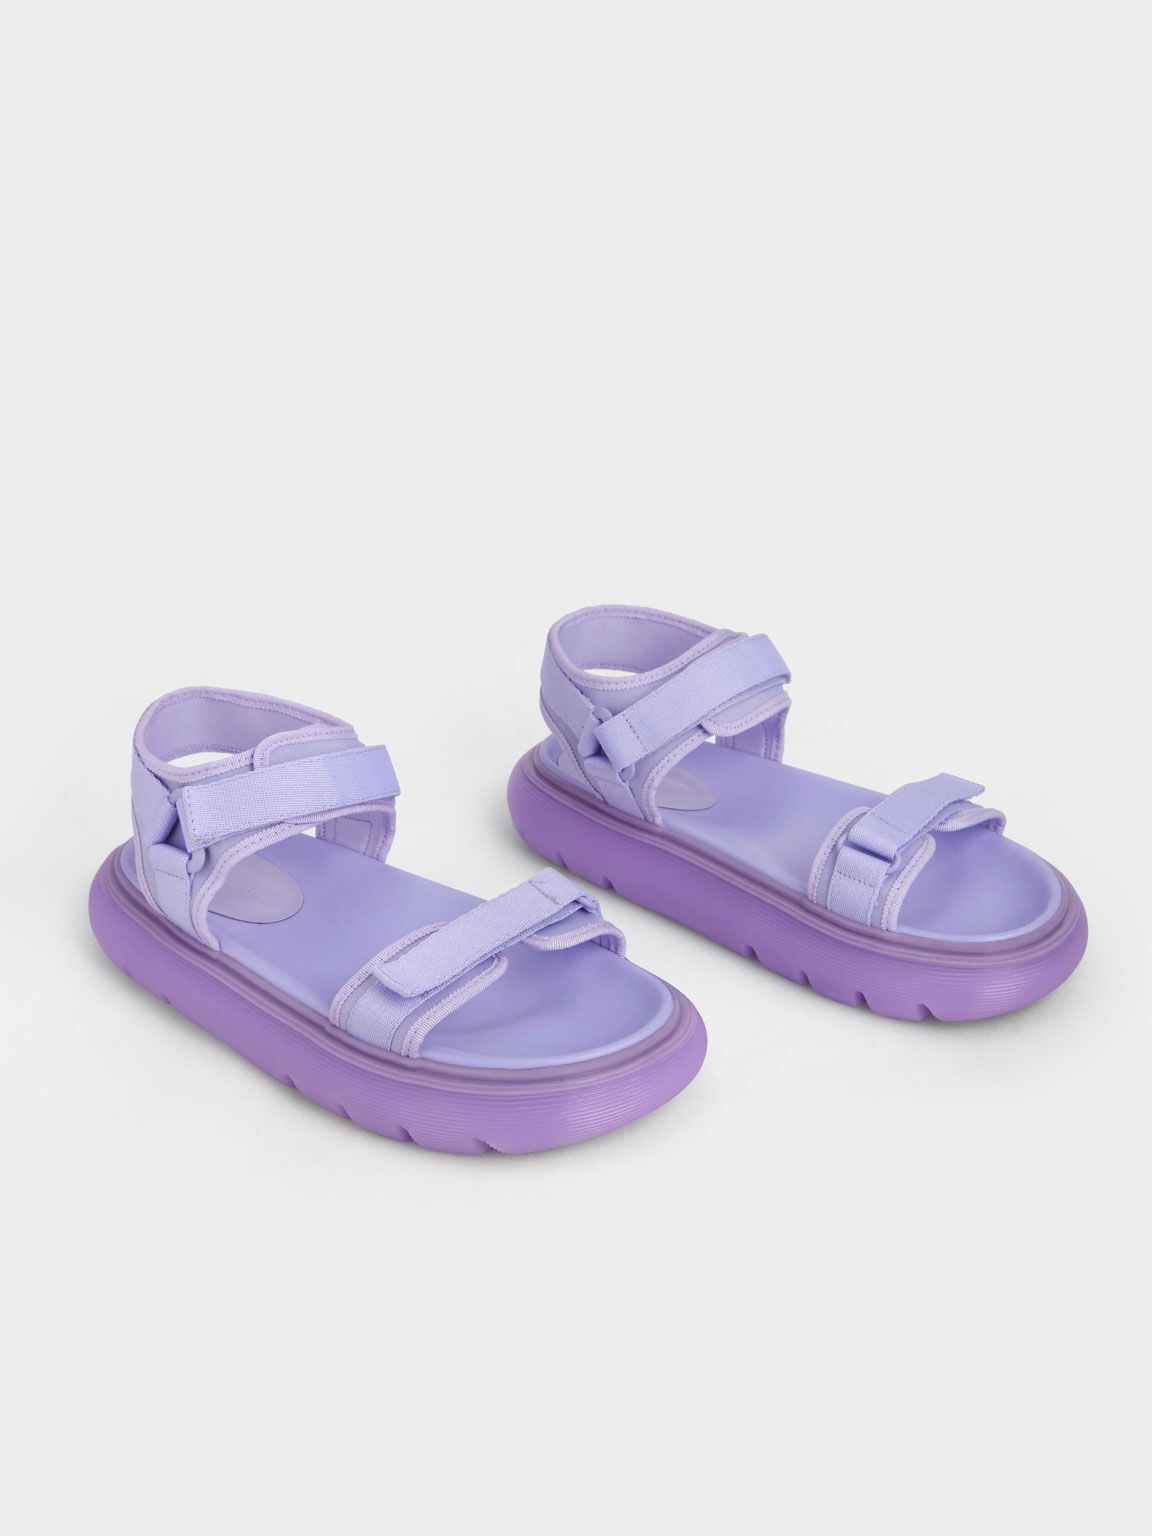 Sandal Sport Recycled Polyester Velcro-Strap, Lilac, hi-res